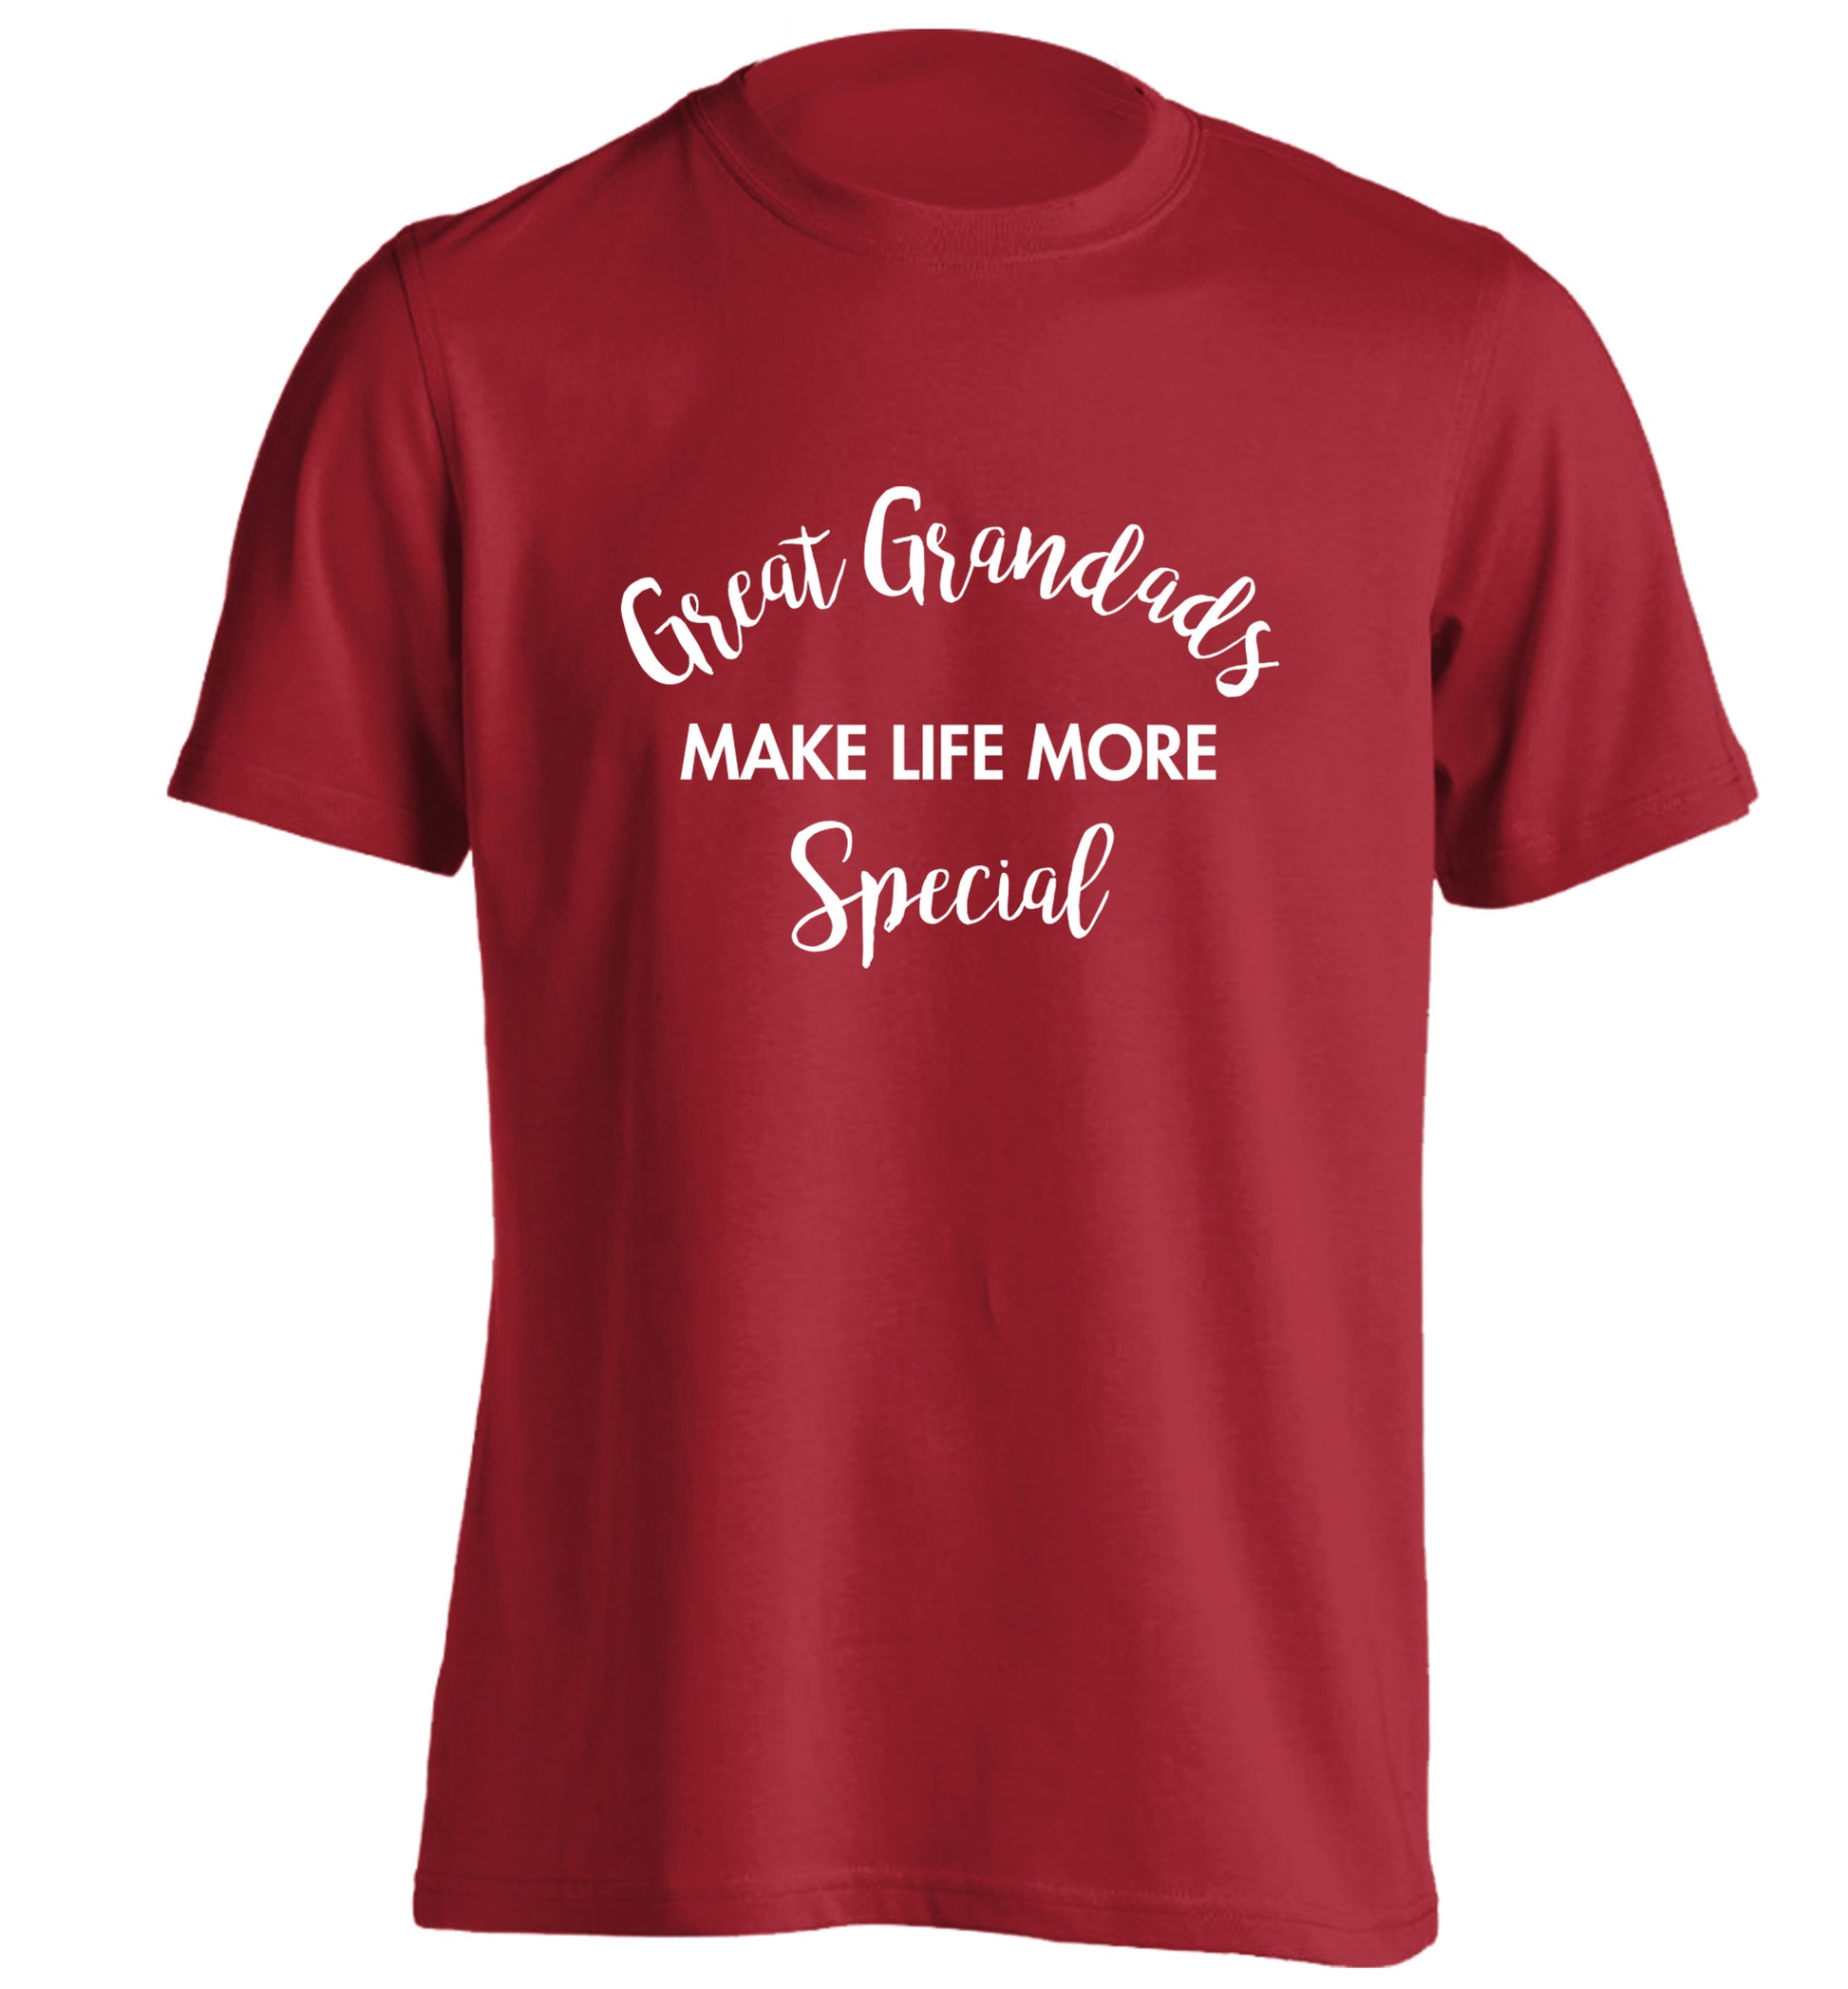 Great Grandads make life more special adults unisex red Tshirt 2XL